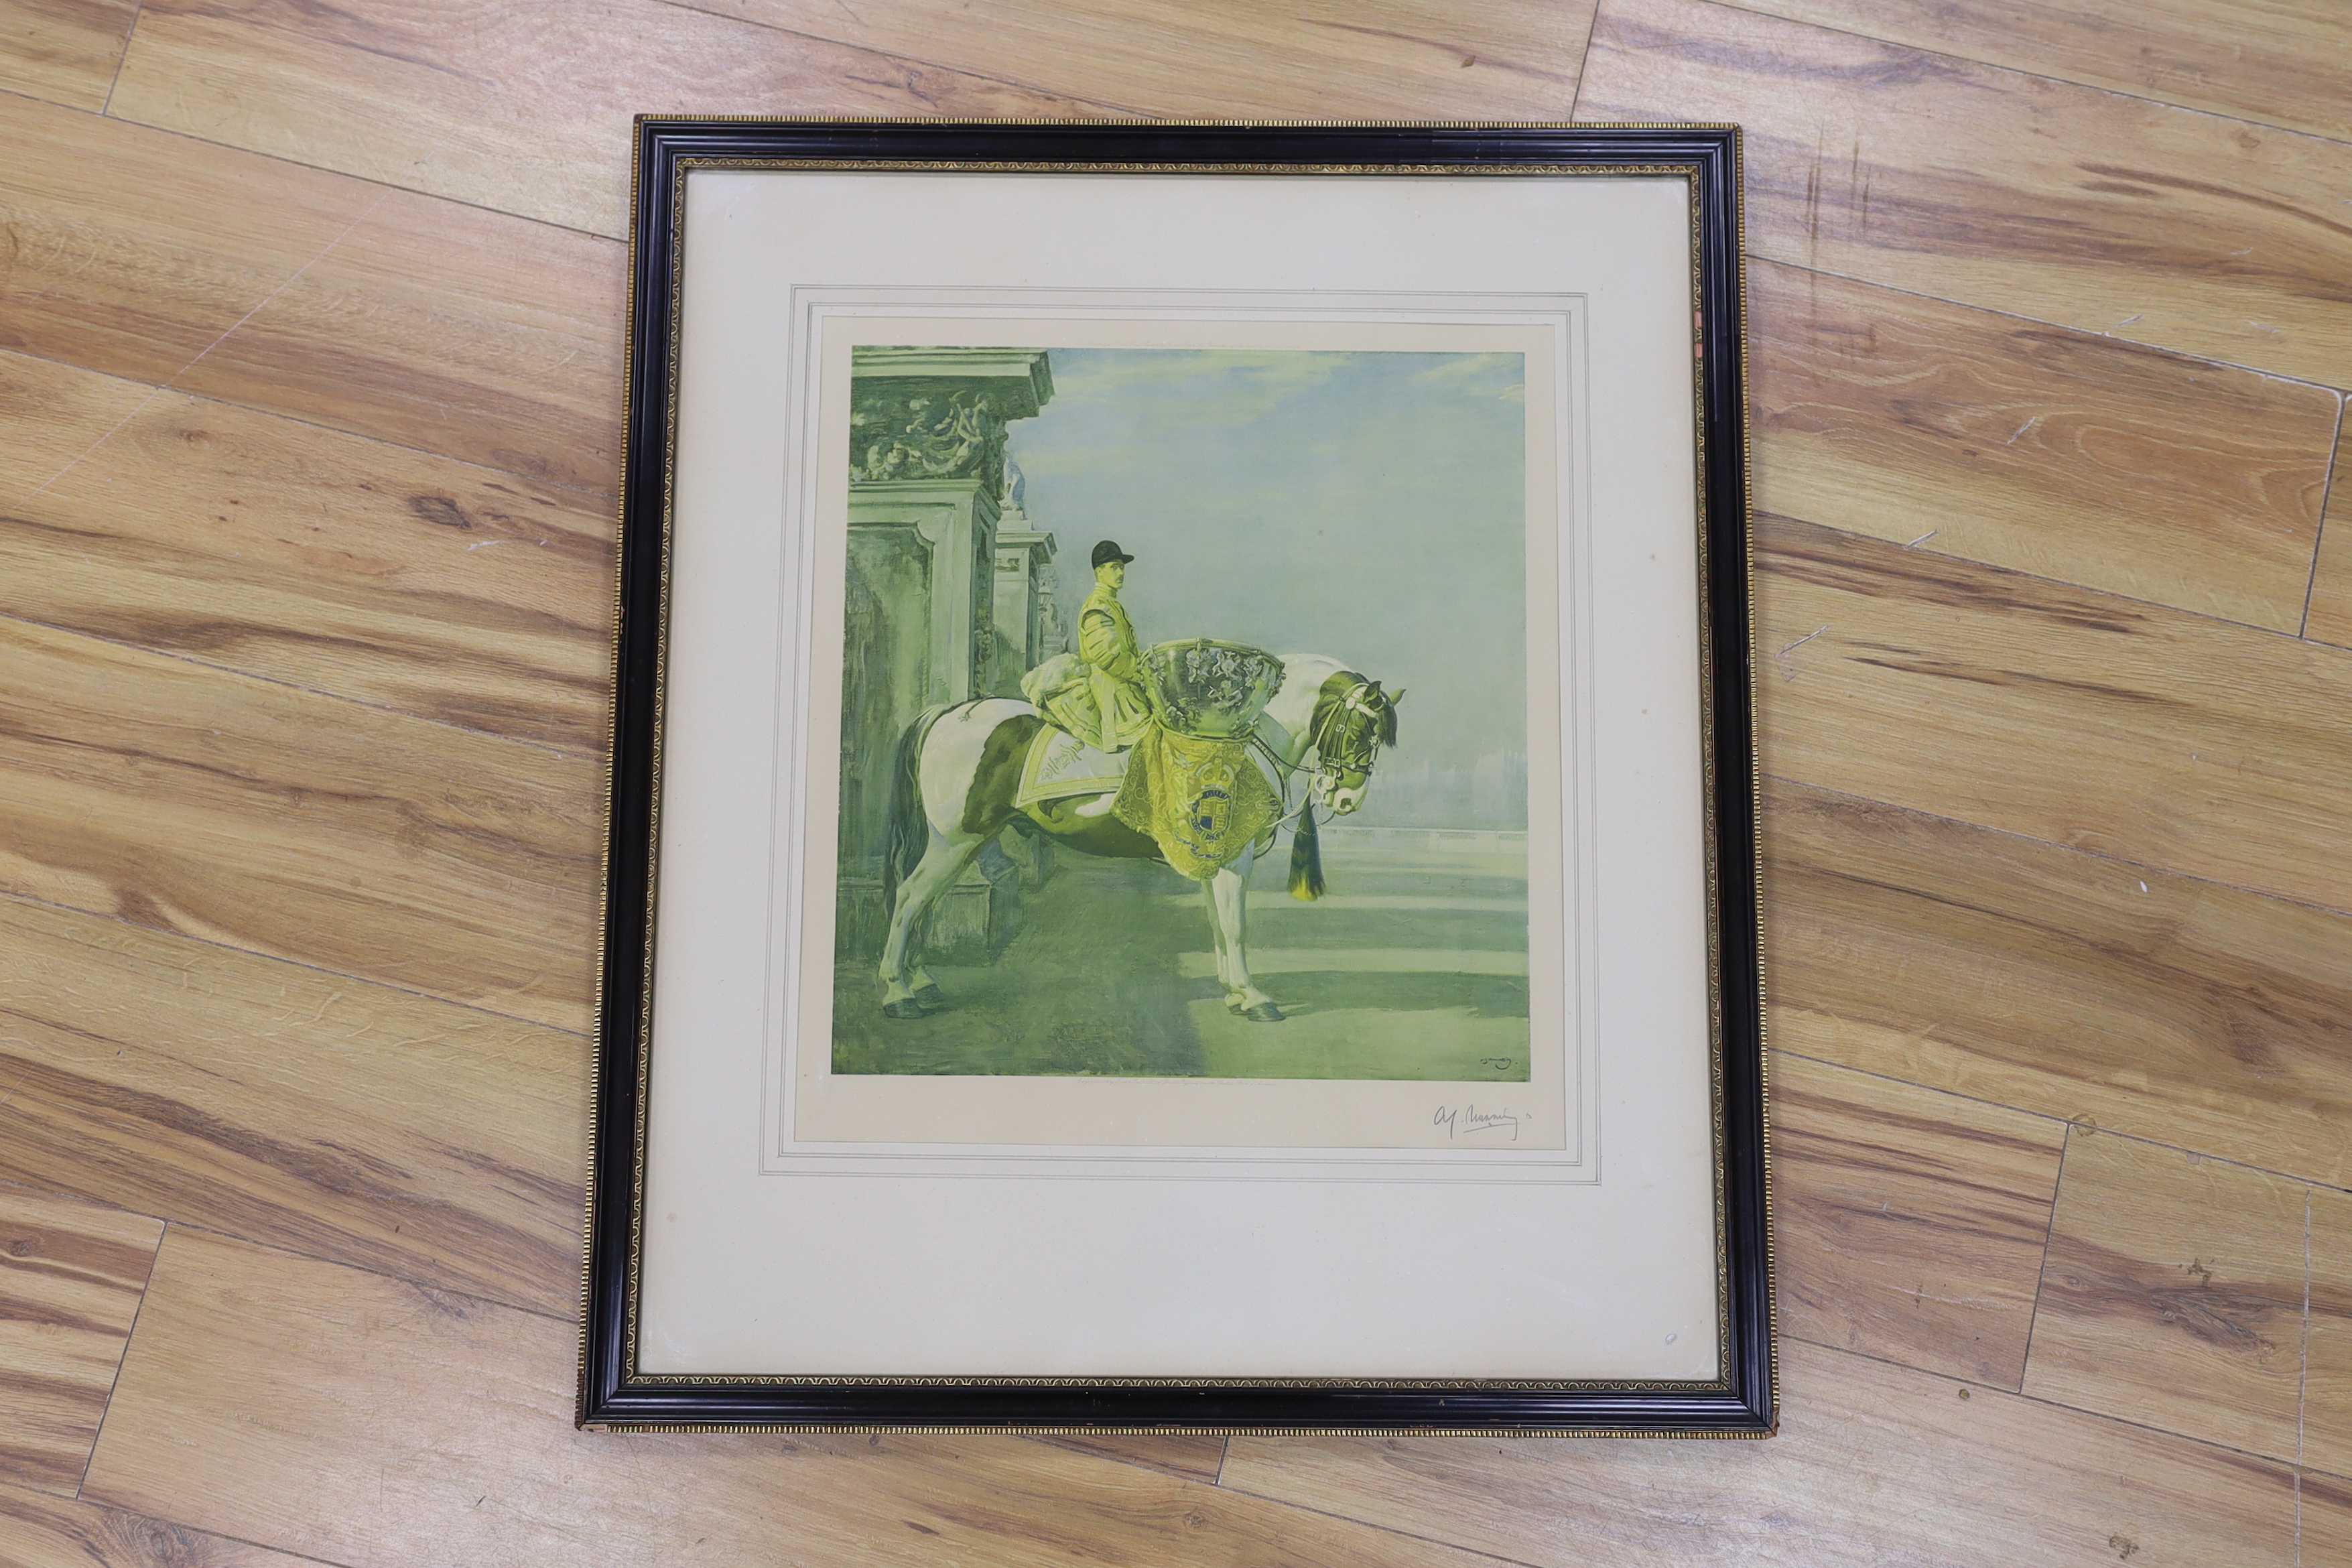 Sir Alfred James Munnings P.R.A., R.W.S. (British, 1878-1959), limited edition print, ‘The Drummer’’ - The Life Guards Drum Major on horseback, signed in pencil lower right, published by Frost and Reed, 1929, 49 x 43cm